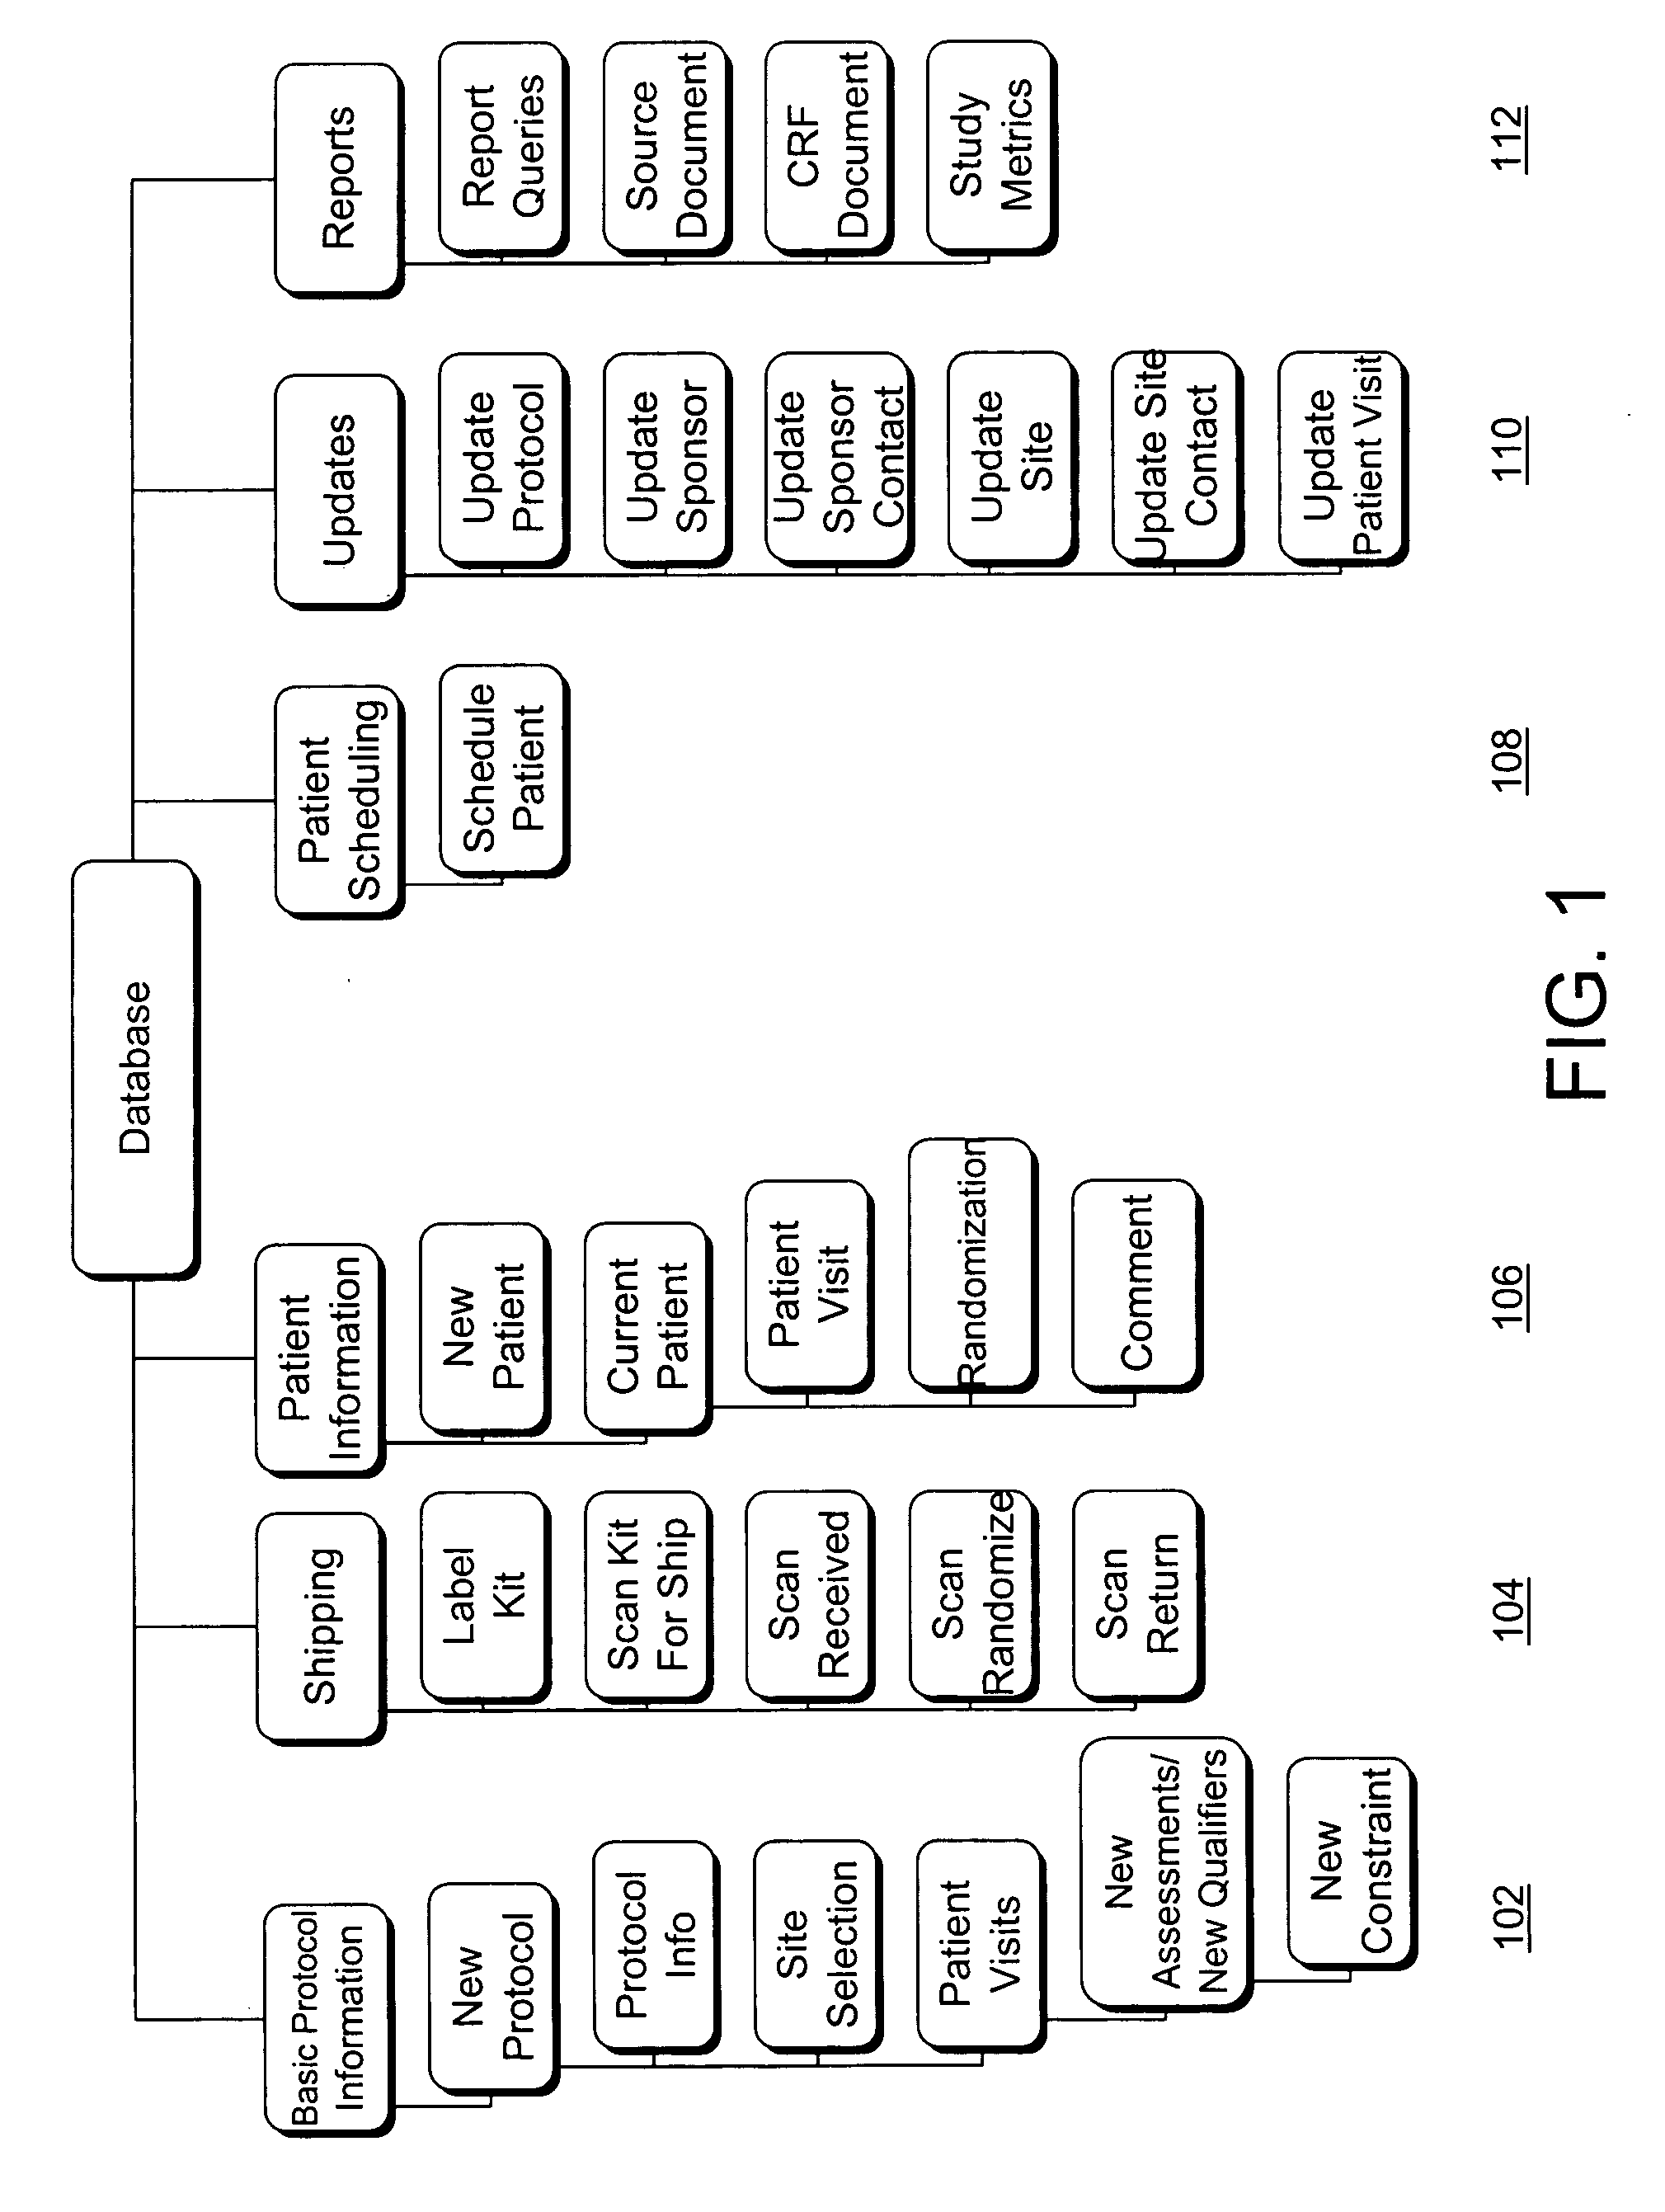 Method and system for automated pharmaceutical research and reporting